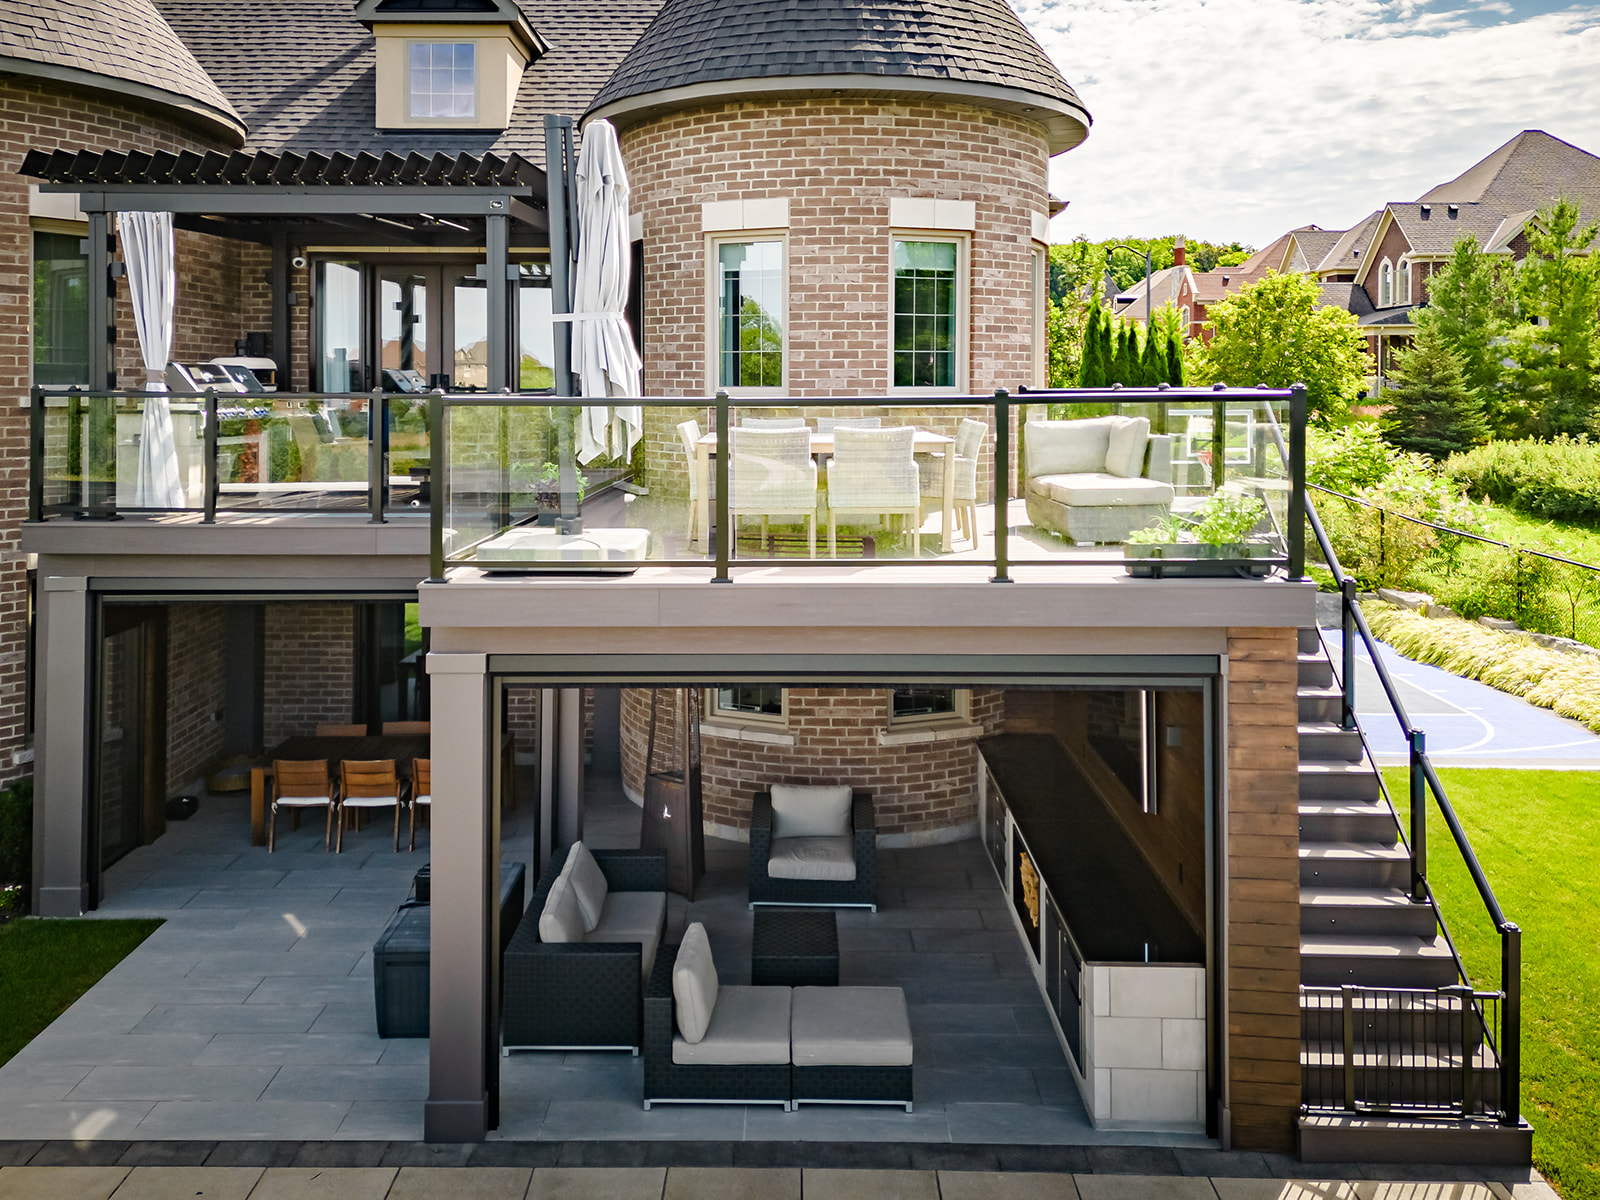 An outdoor patio set on the bottom with a deck overtop with another outdoor patio set and stairs leading up to the deck.